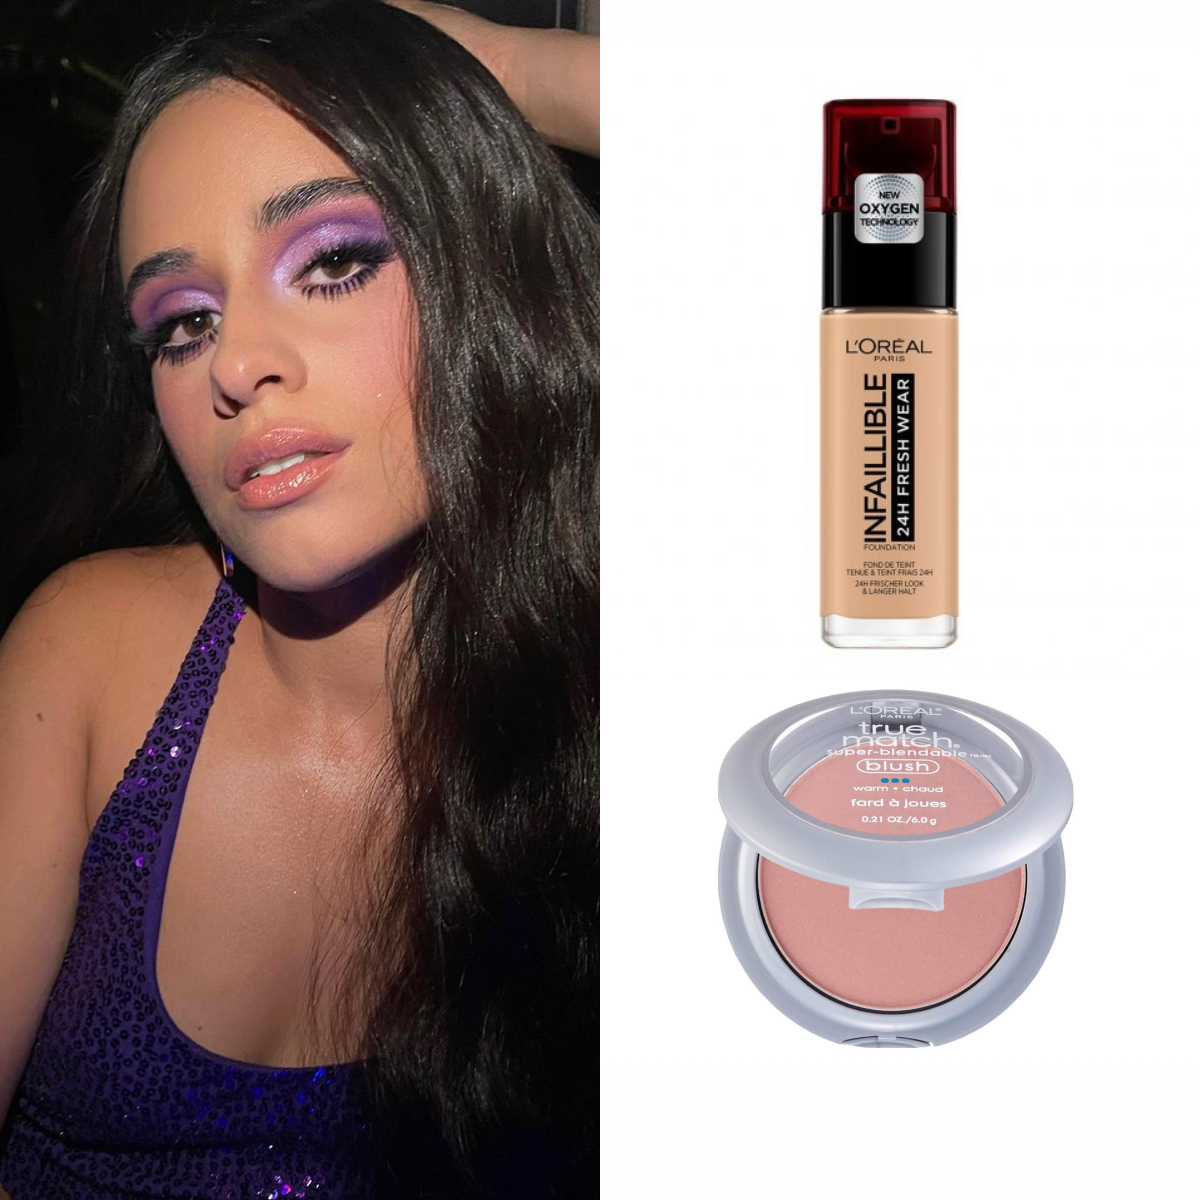 Camila Cabello Closet on Twitter: "For Camila's Met Gala look, makeup artist Patrick used products from @LOrealParisUSA, including the Infallible Foundation, the True Super Blendable Blush, Paint in Violet